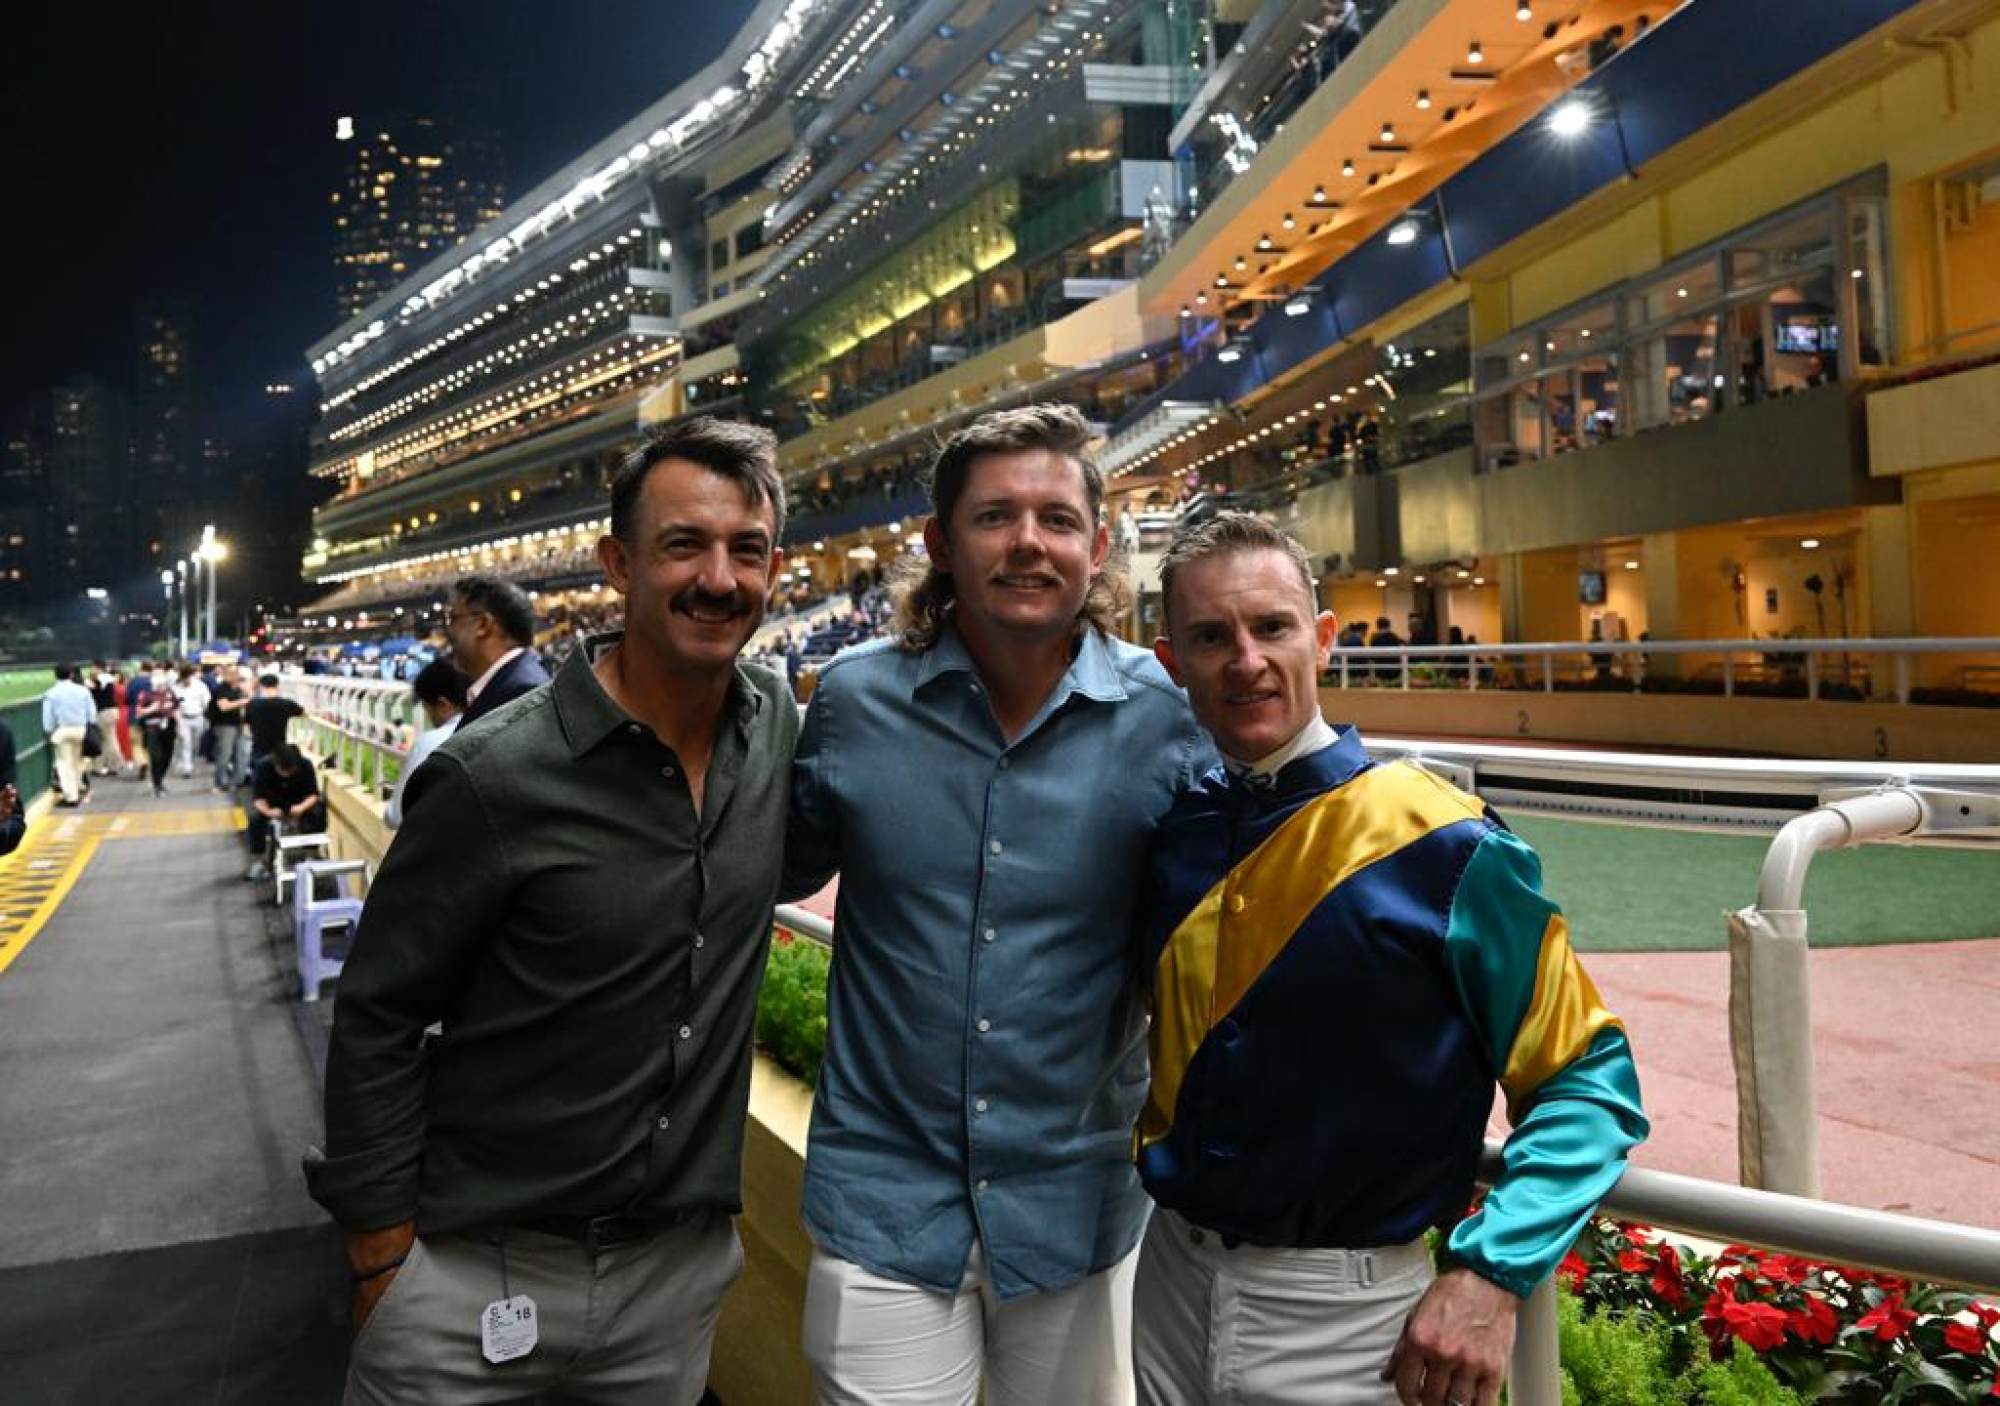 Wade Ormsby, Cameron Smith and Zac Purton between races at Happy Valley on Wednesday night. Photo: Paul Lakatos, Asian Tour